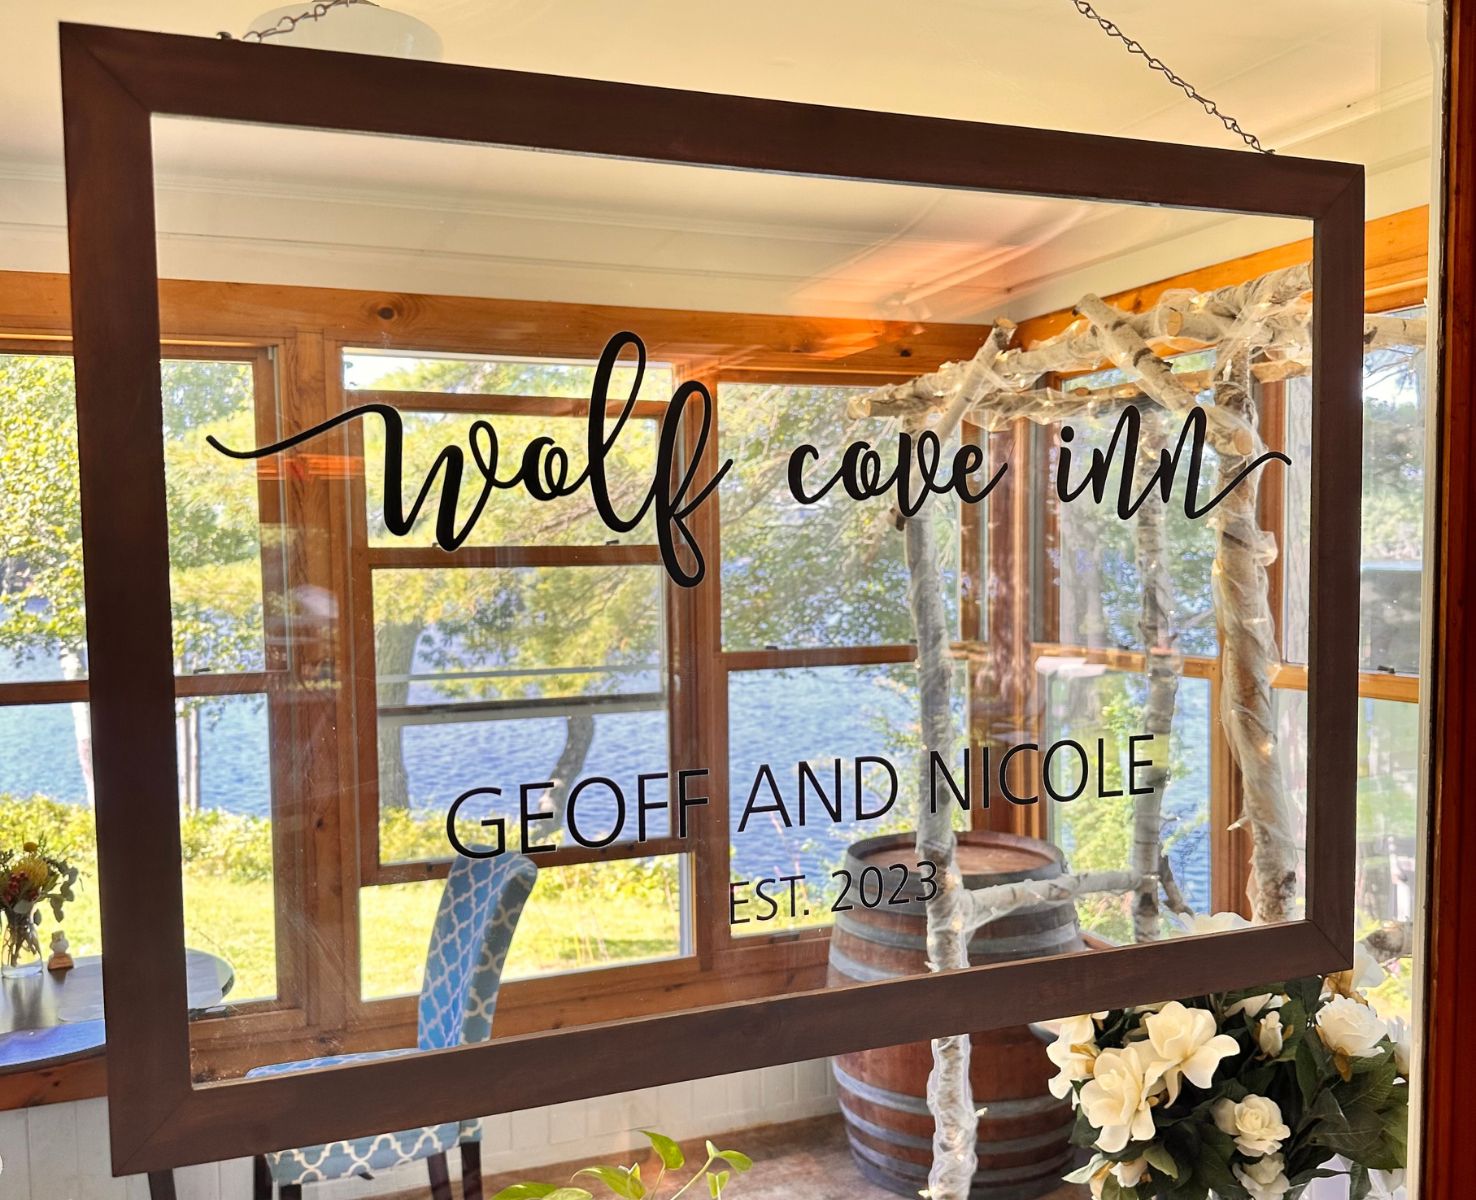 Wood framed glass sign etched with "Wolf Cove Inn, Geoff & Nicole Est. 2023"